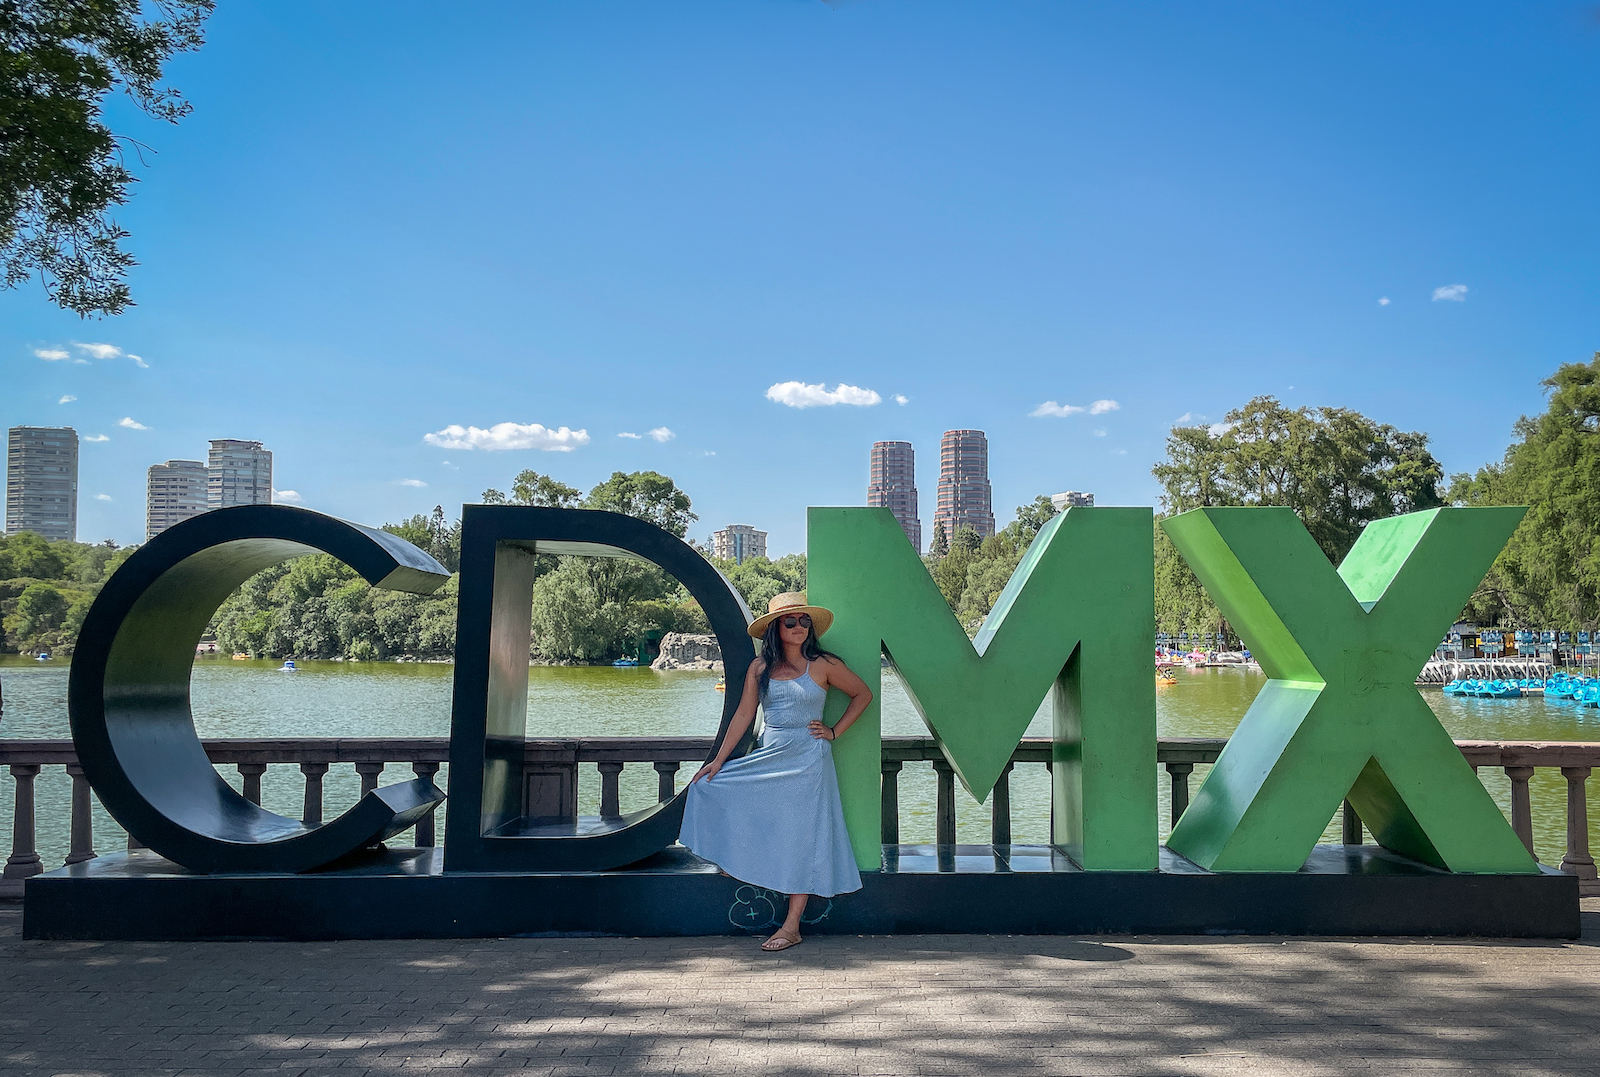 Mexico City Travel Guide | What to See, Eat, and Drink